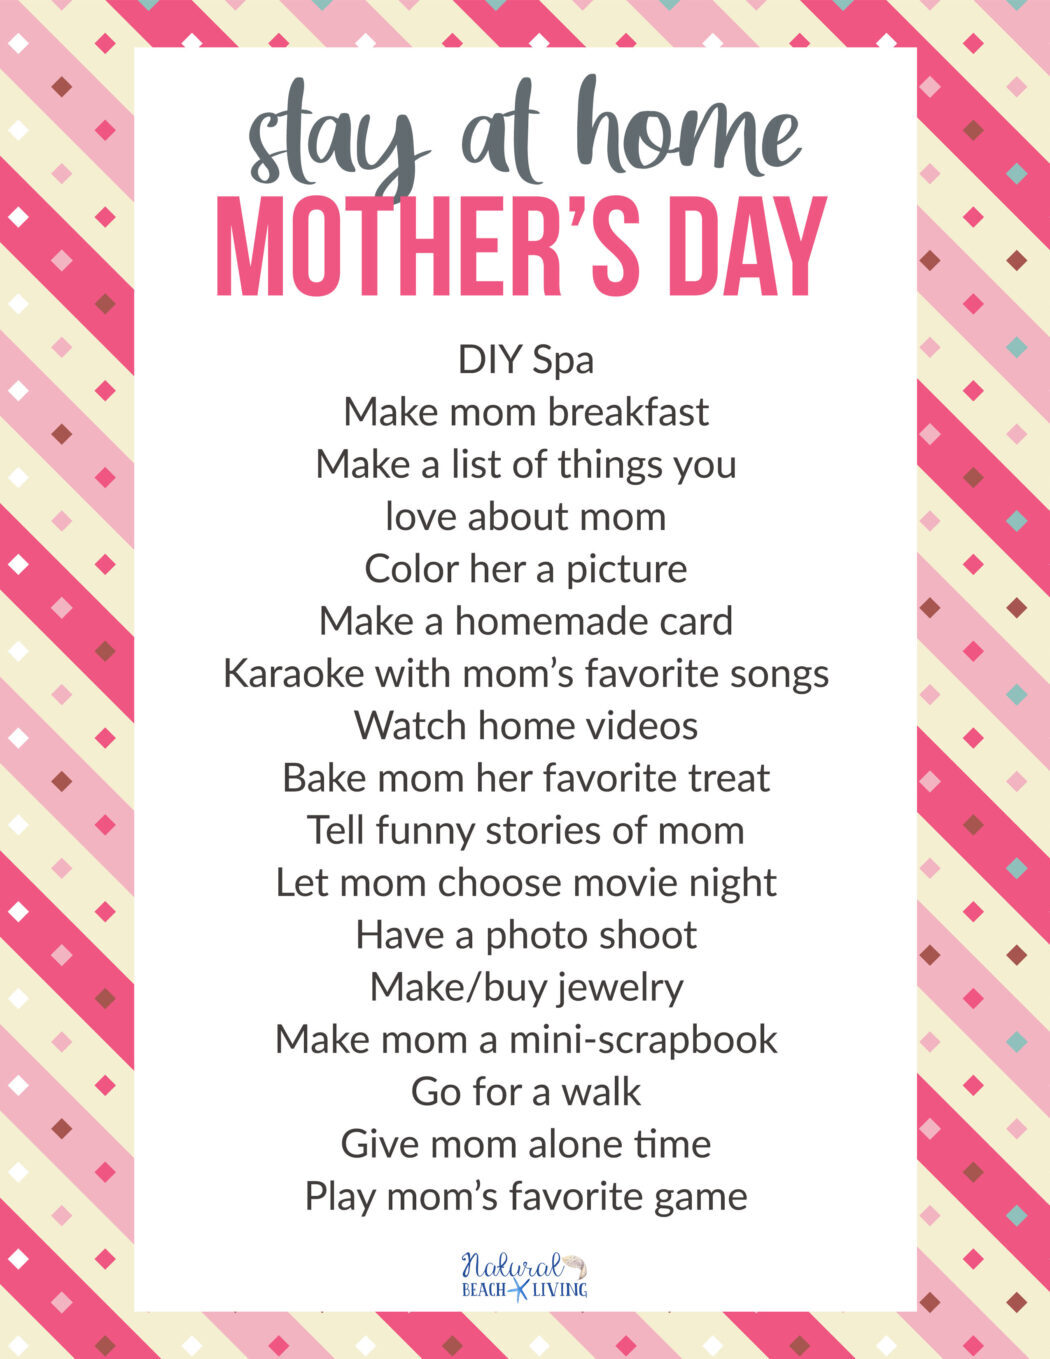 20+ Stay at Home Mother’s Day Ideas